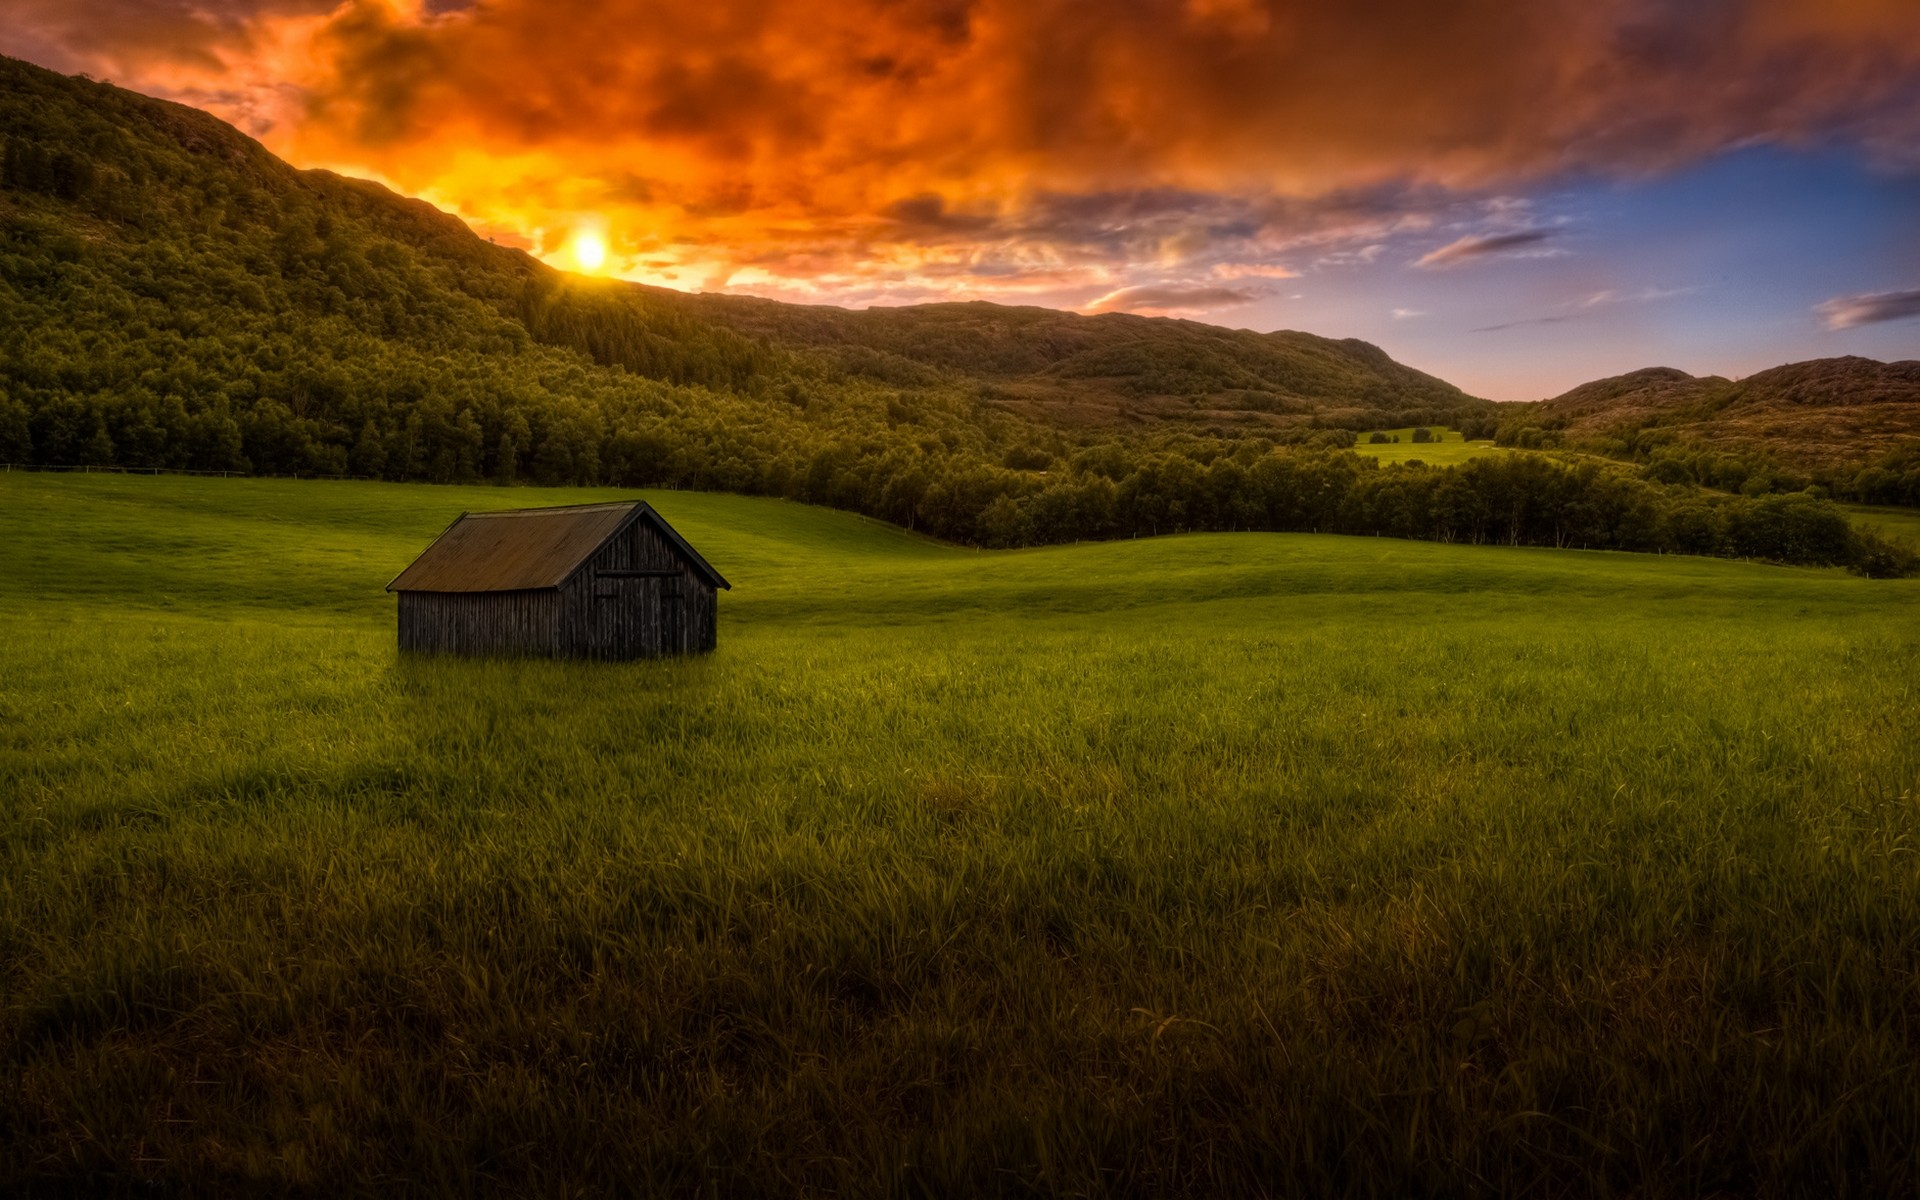 General 1920x1200 landscape nature sunset mountains forest grass hut clouds colorful sky summer sunlight